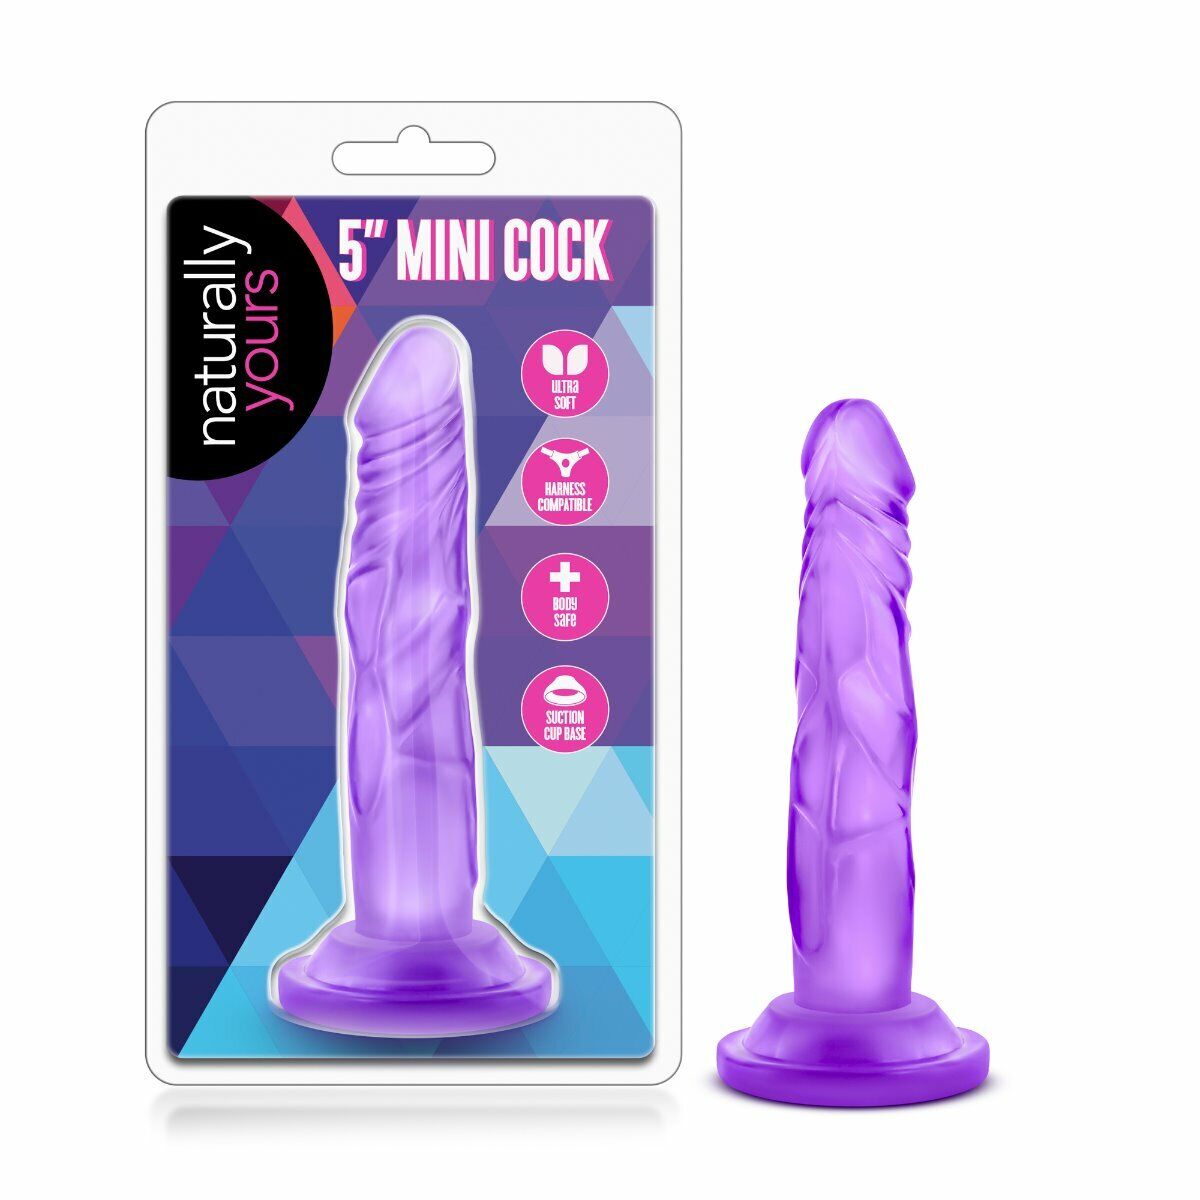 Naturally Yours 5 Inch Mini Cock Realistic Dildo Dong Suction Cup